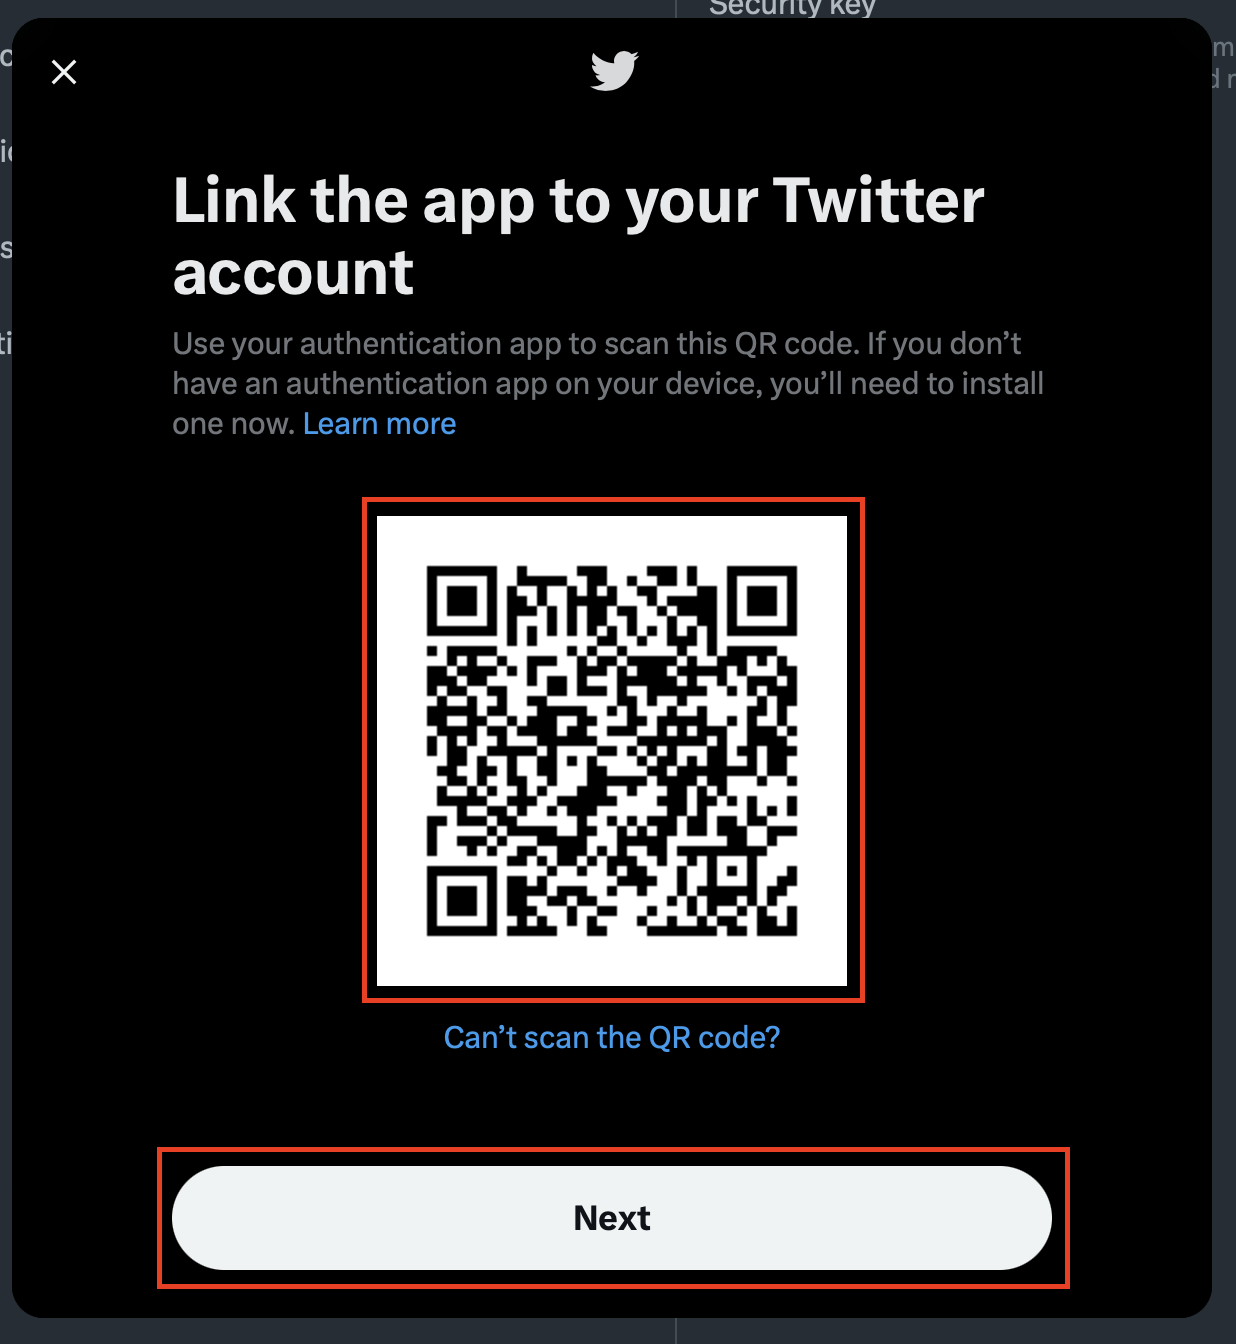 In your authenticator app, use your phone's camera to scan the QR code on the screen. Click "Next" once the code is scanned and you've added Twitter to the authenticator app.